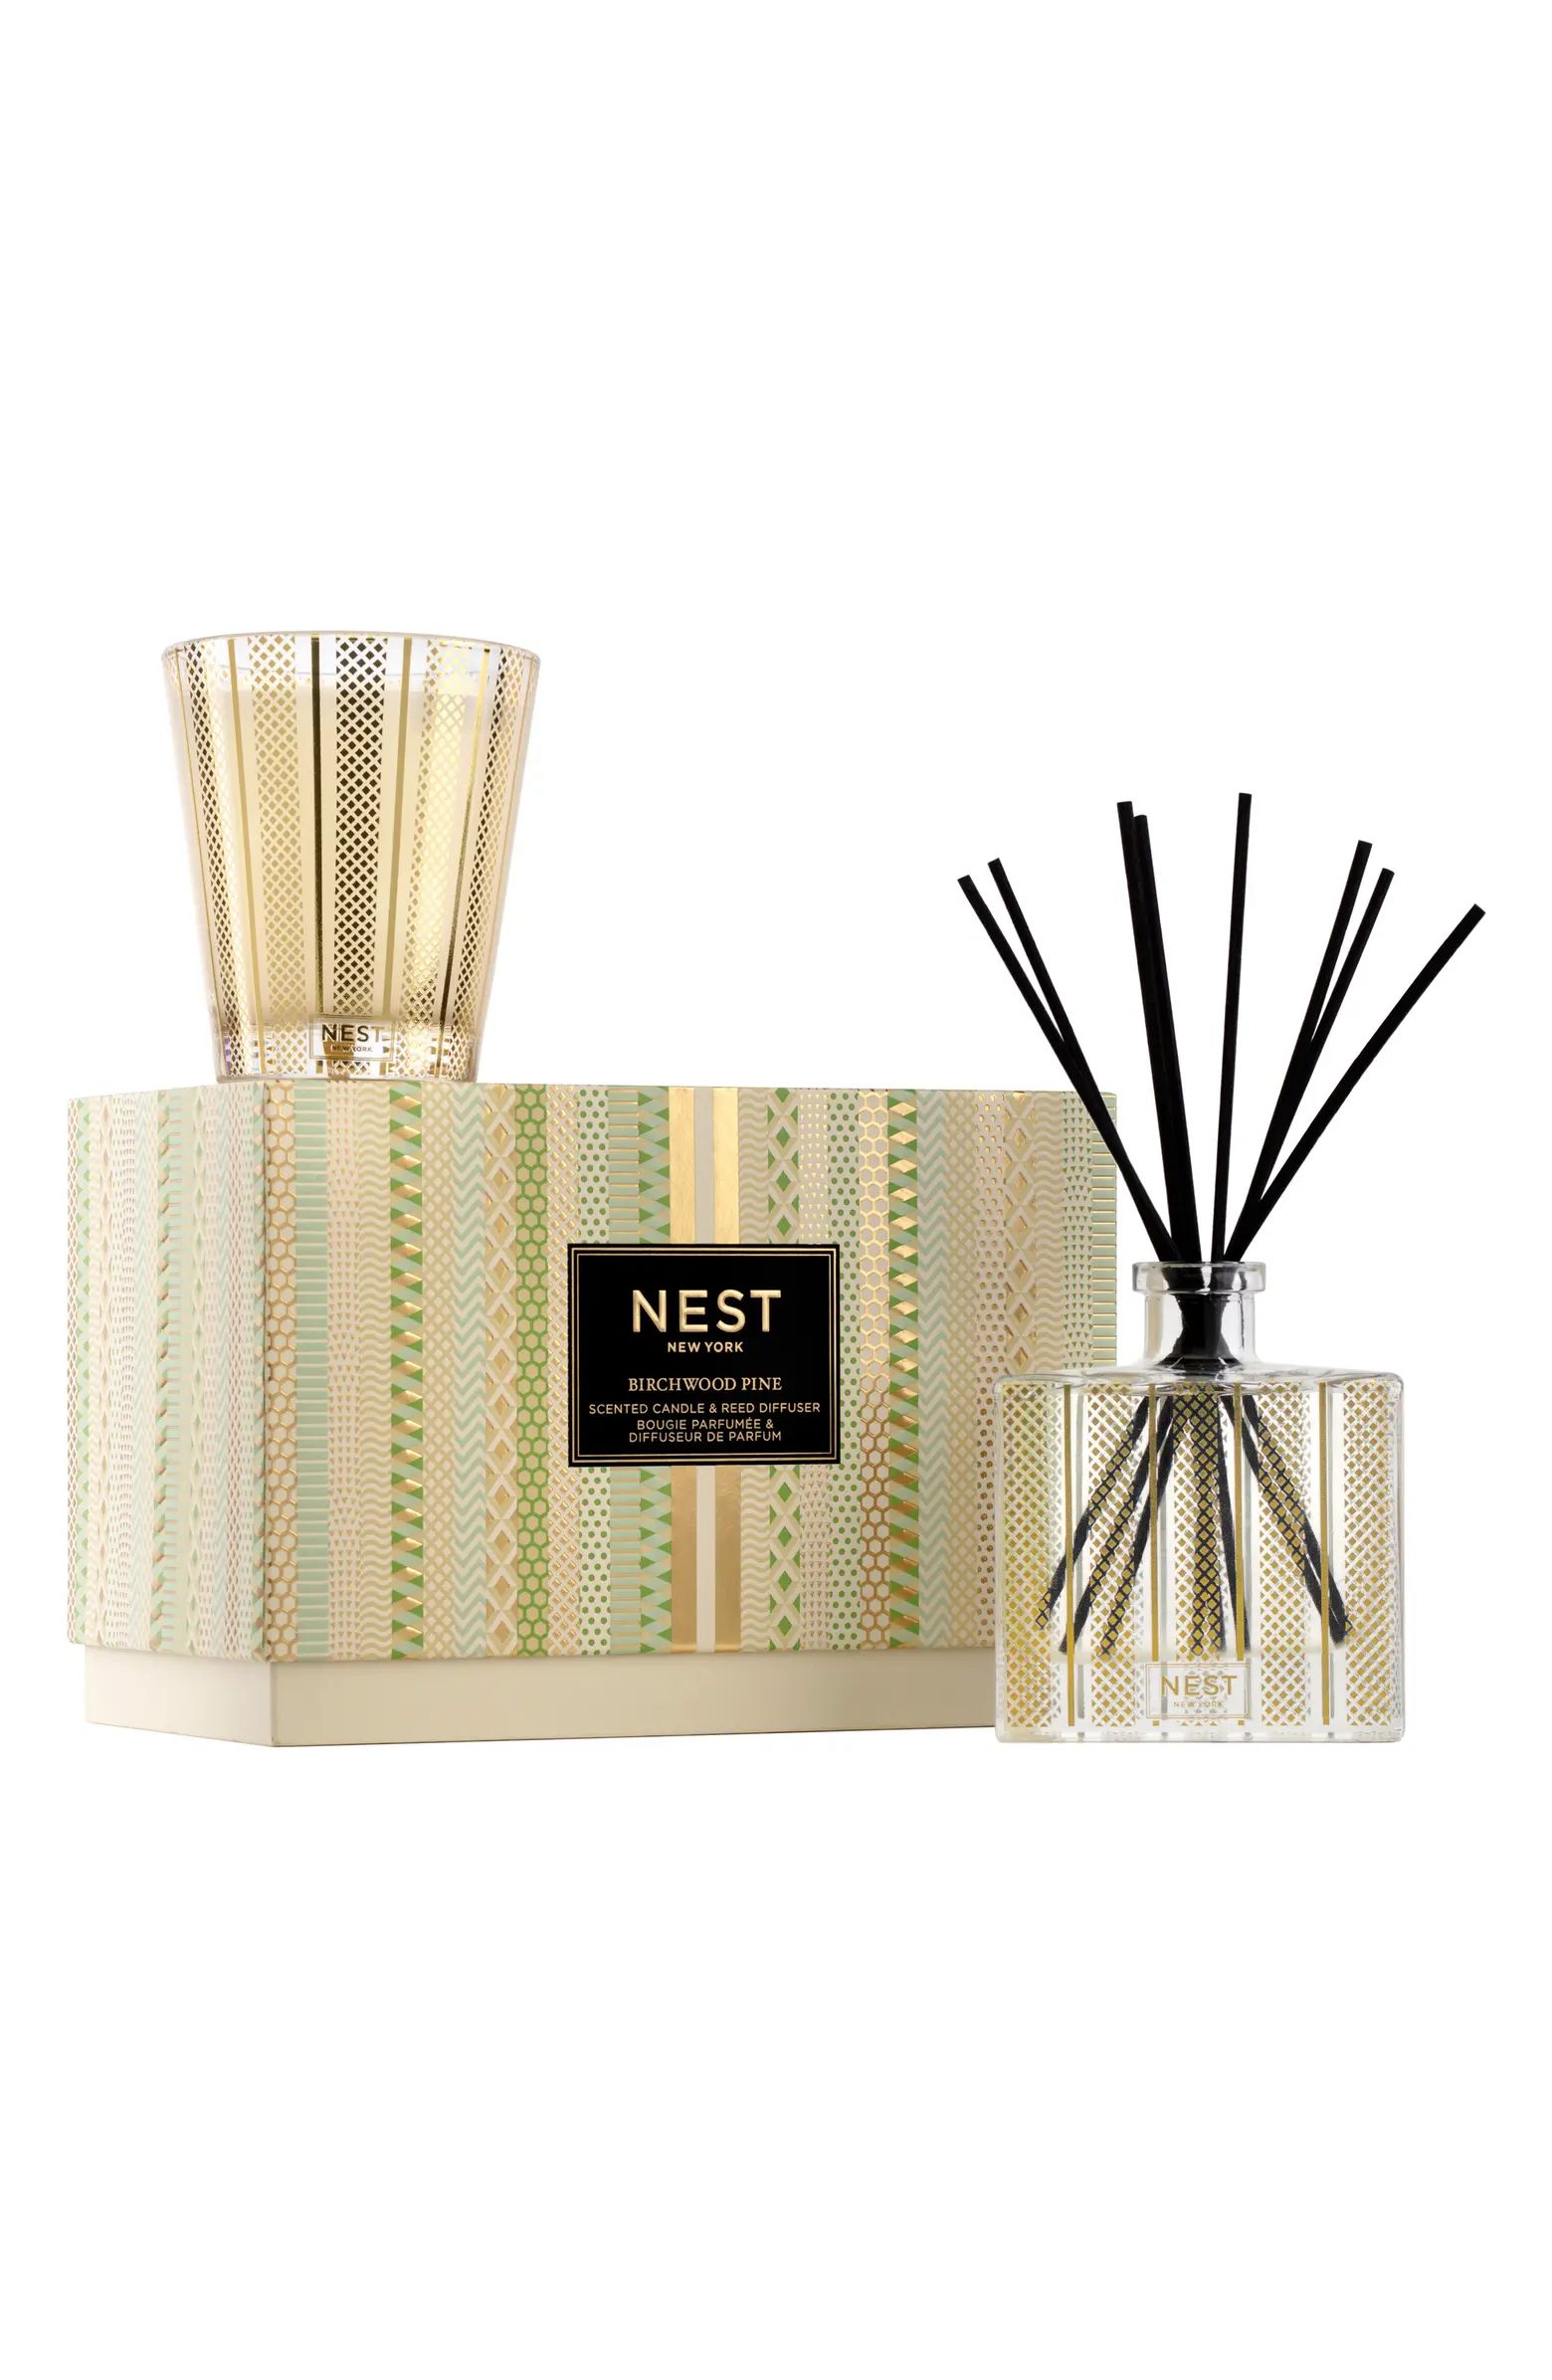 NEST New York New York Birchwood Pine Scented Candle & Reed Diffuser Set | Nordstrom | Nordstrom